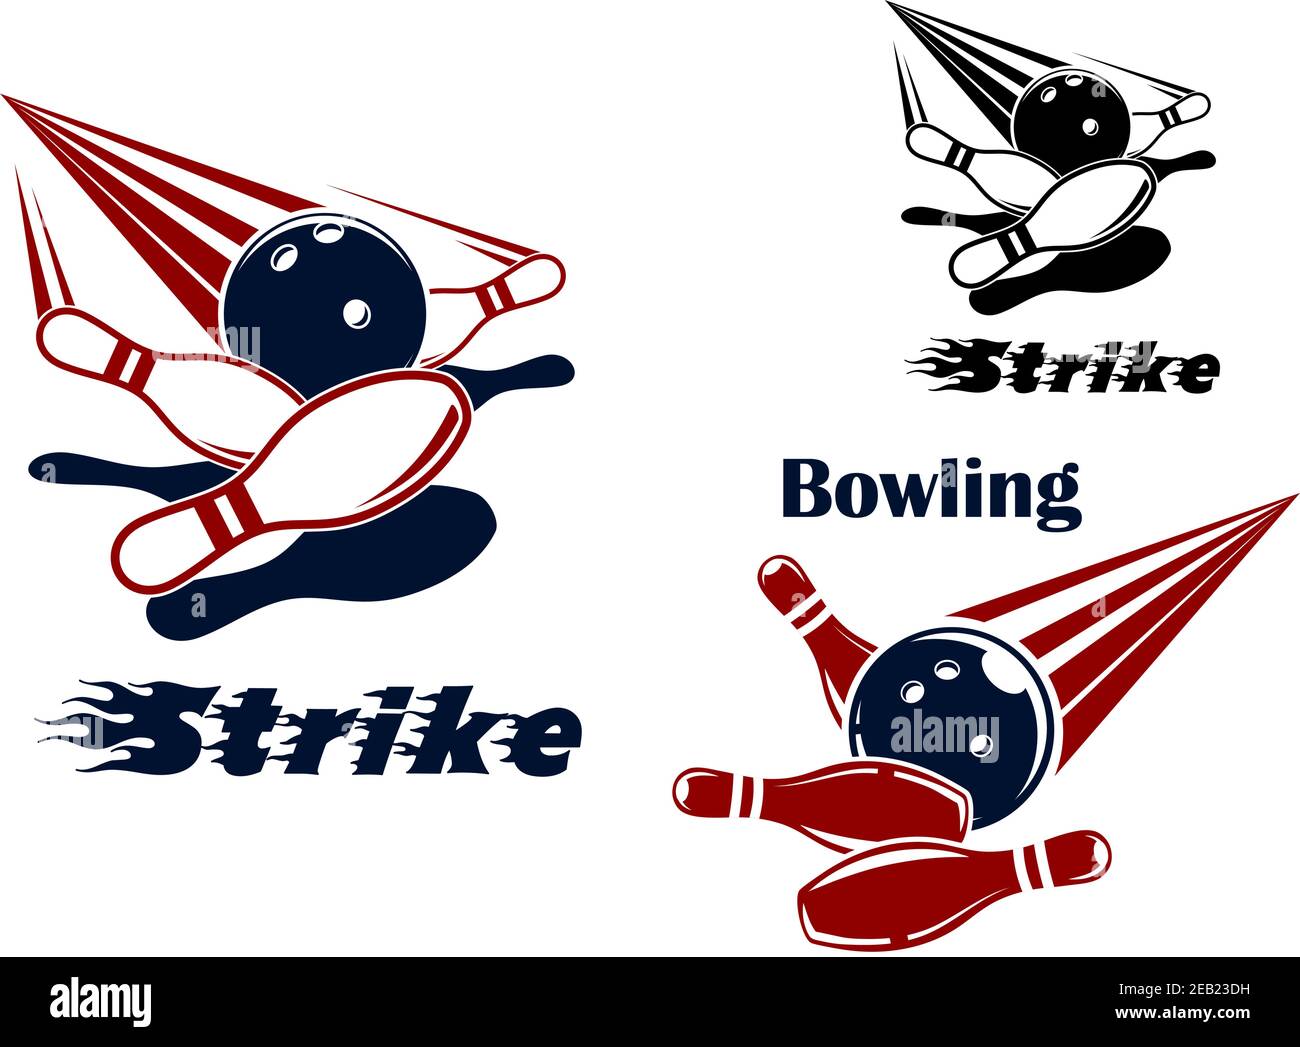 Bowling and Strike logo or emblems design templates showing bowling balls crashing into pins on a lanes in red, blue, black and white colors Stock Vector